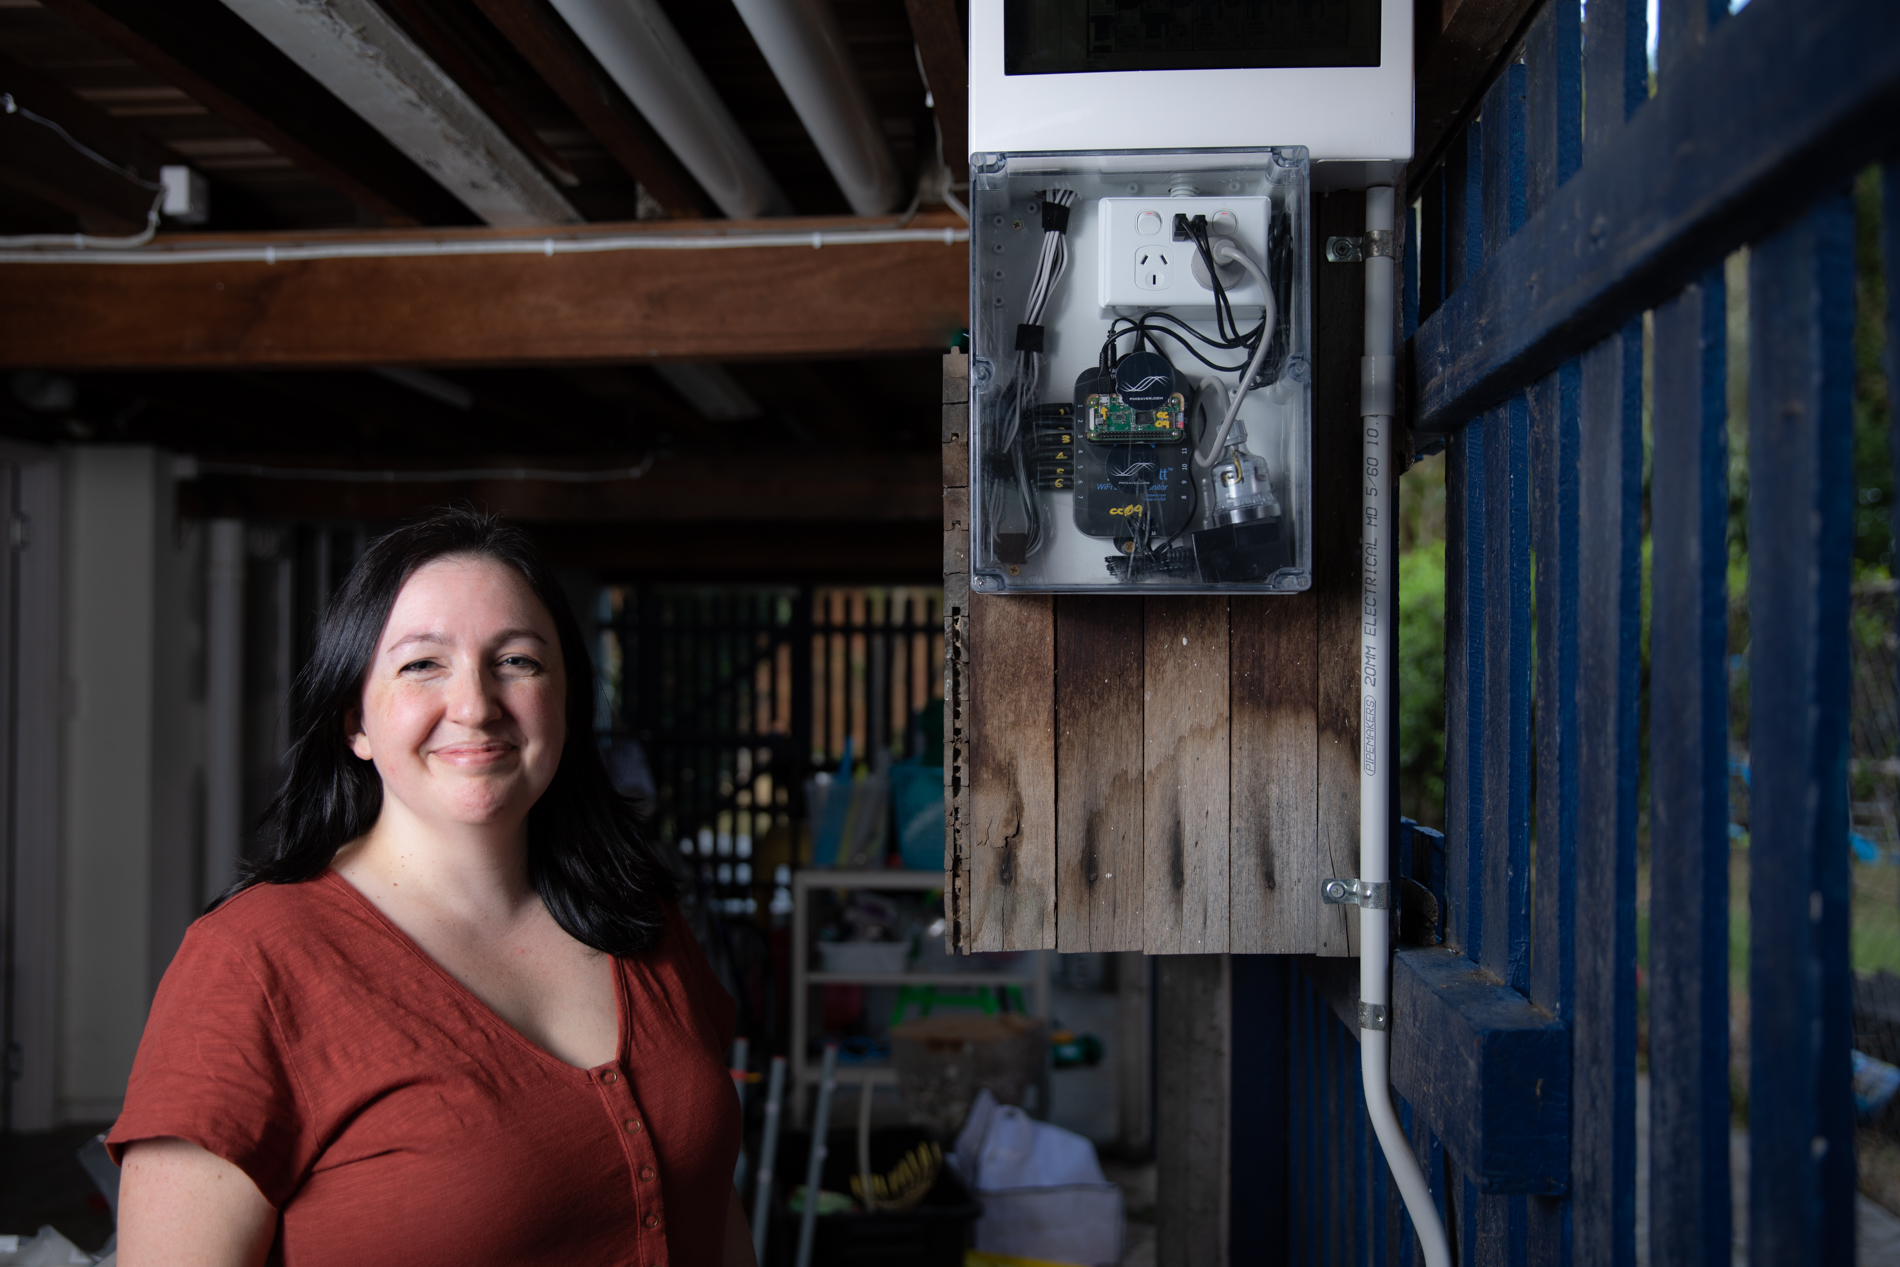 Emma Boyd standing next to her home energy monitoring system